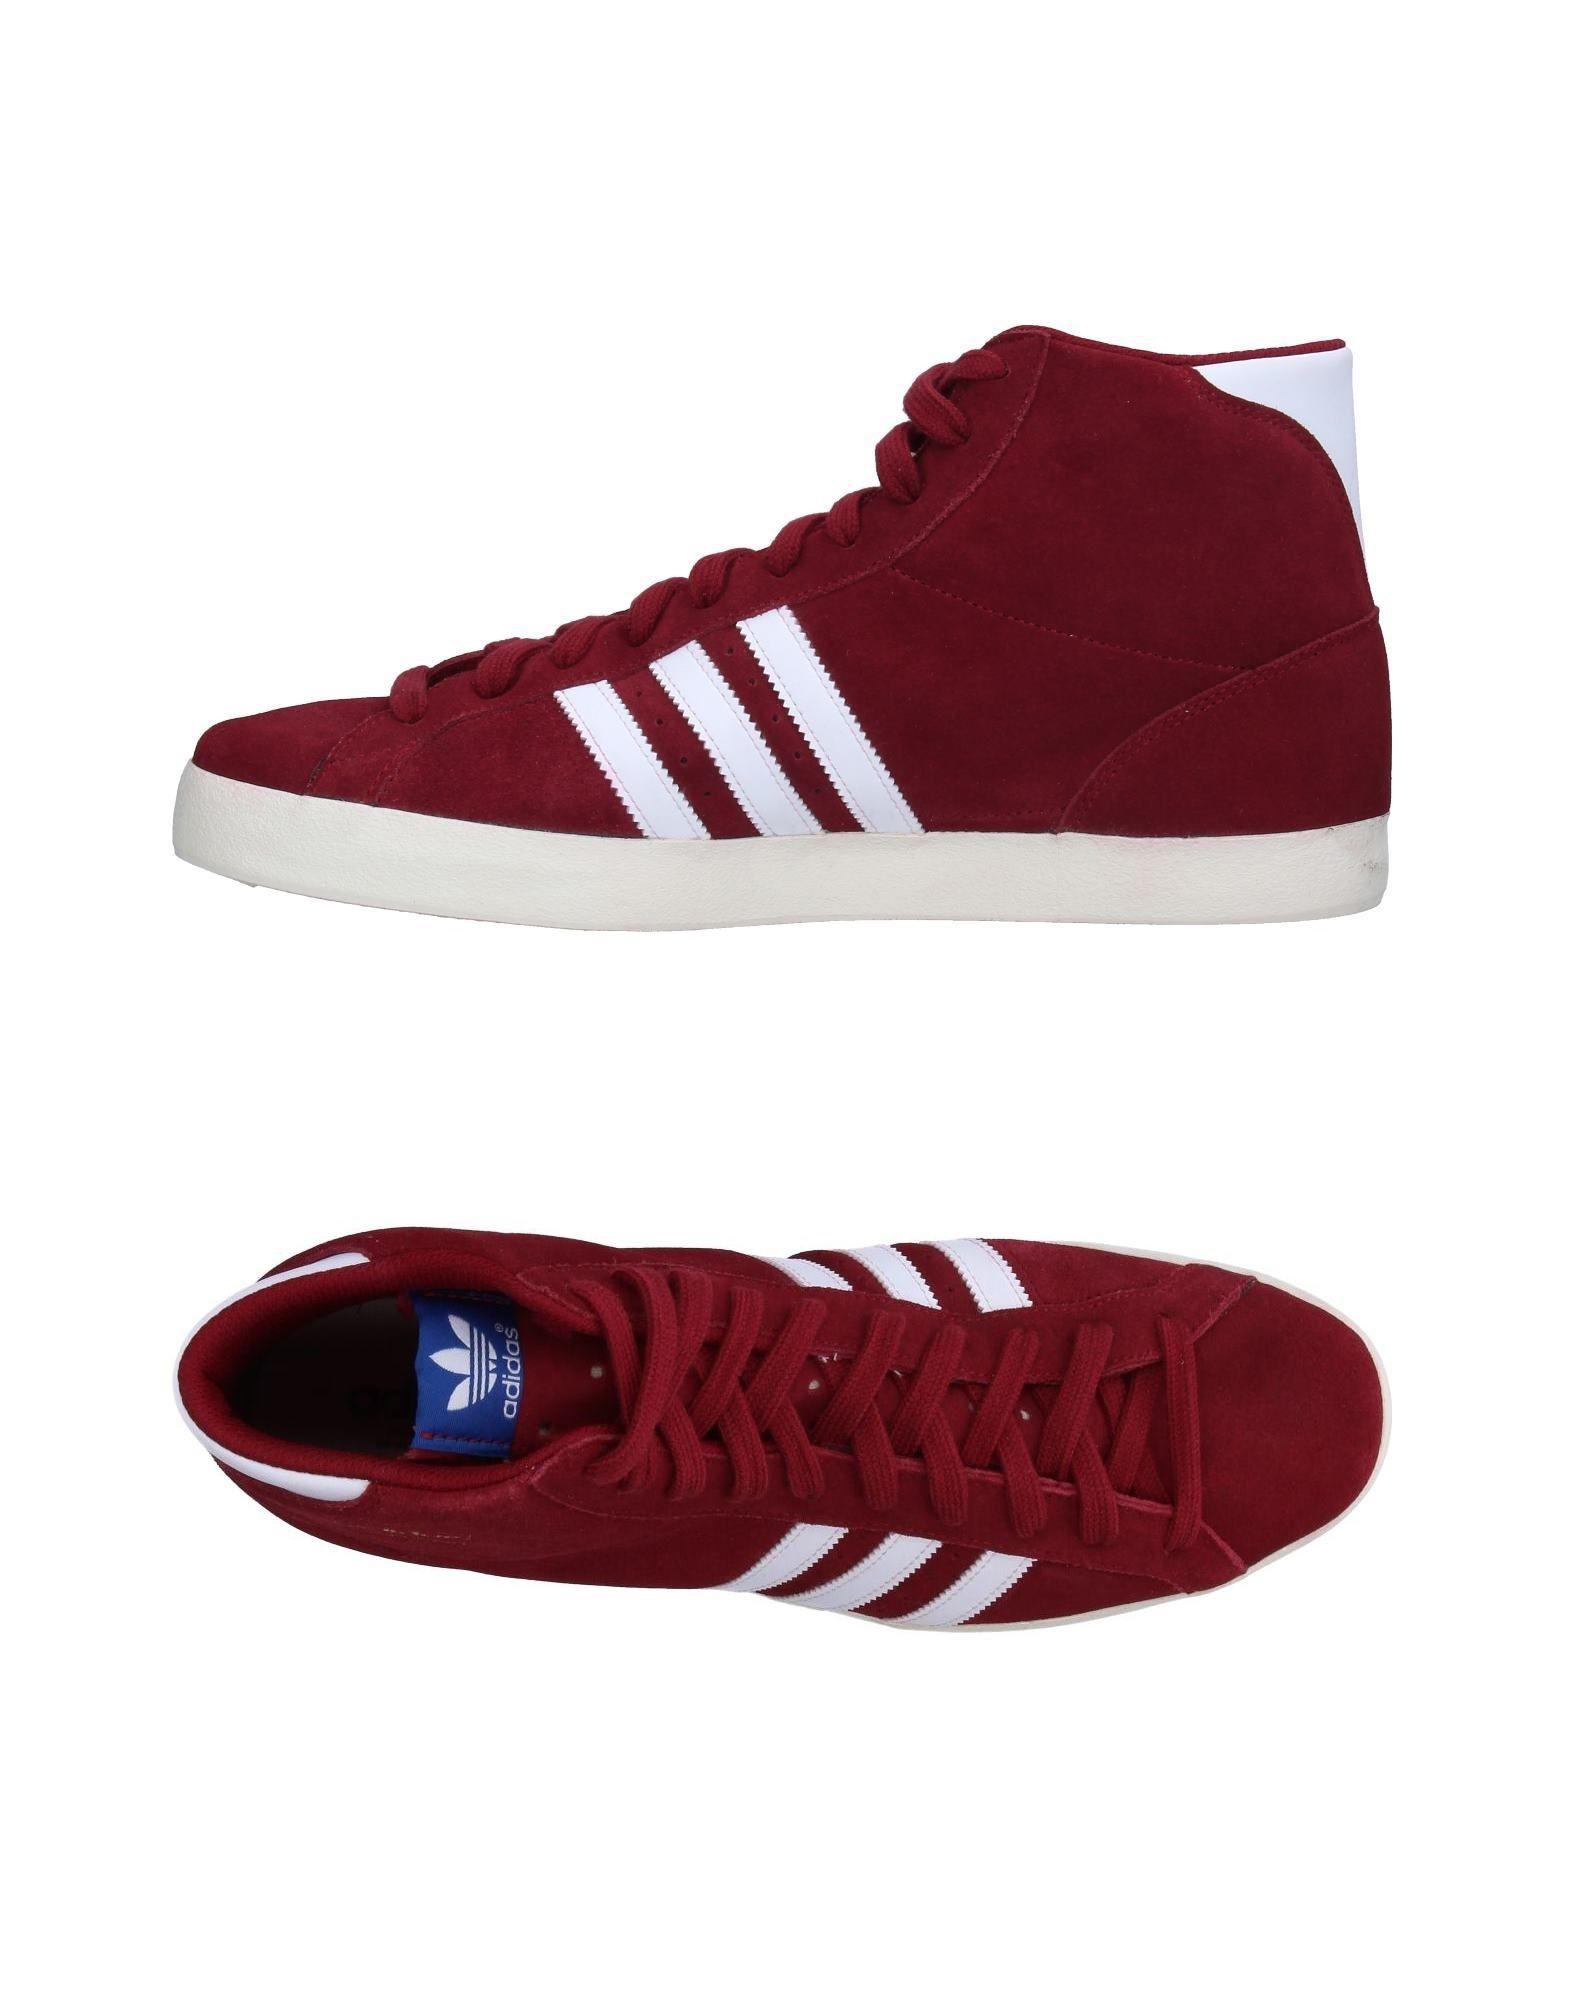 adidas Originals Rubber High-tops & Sneakers in Maroon (Red) for Men | Lyst